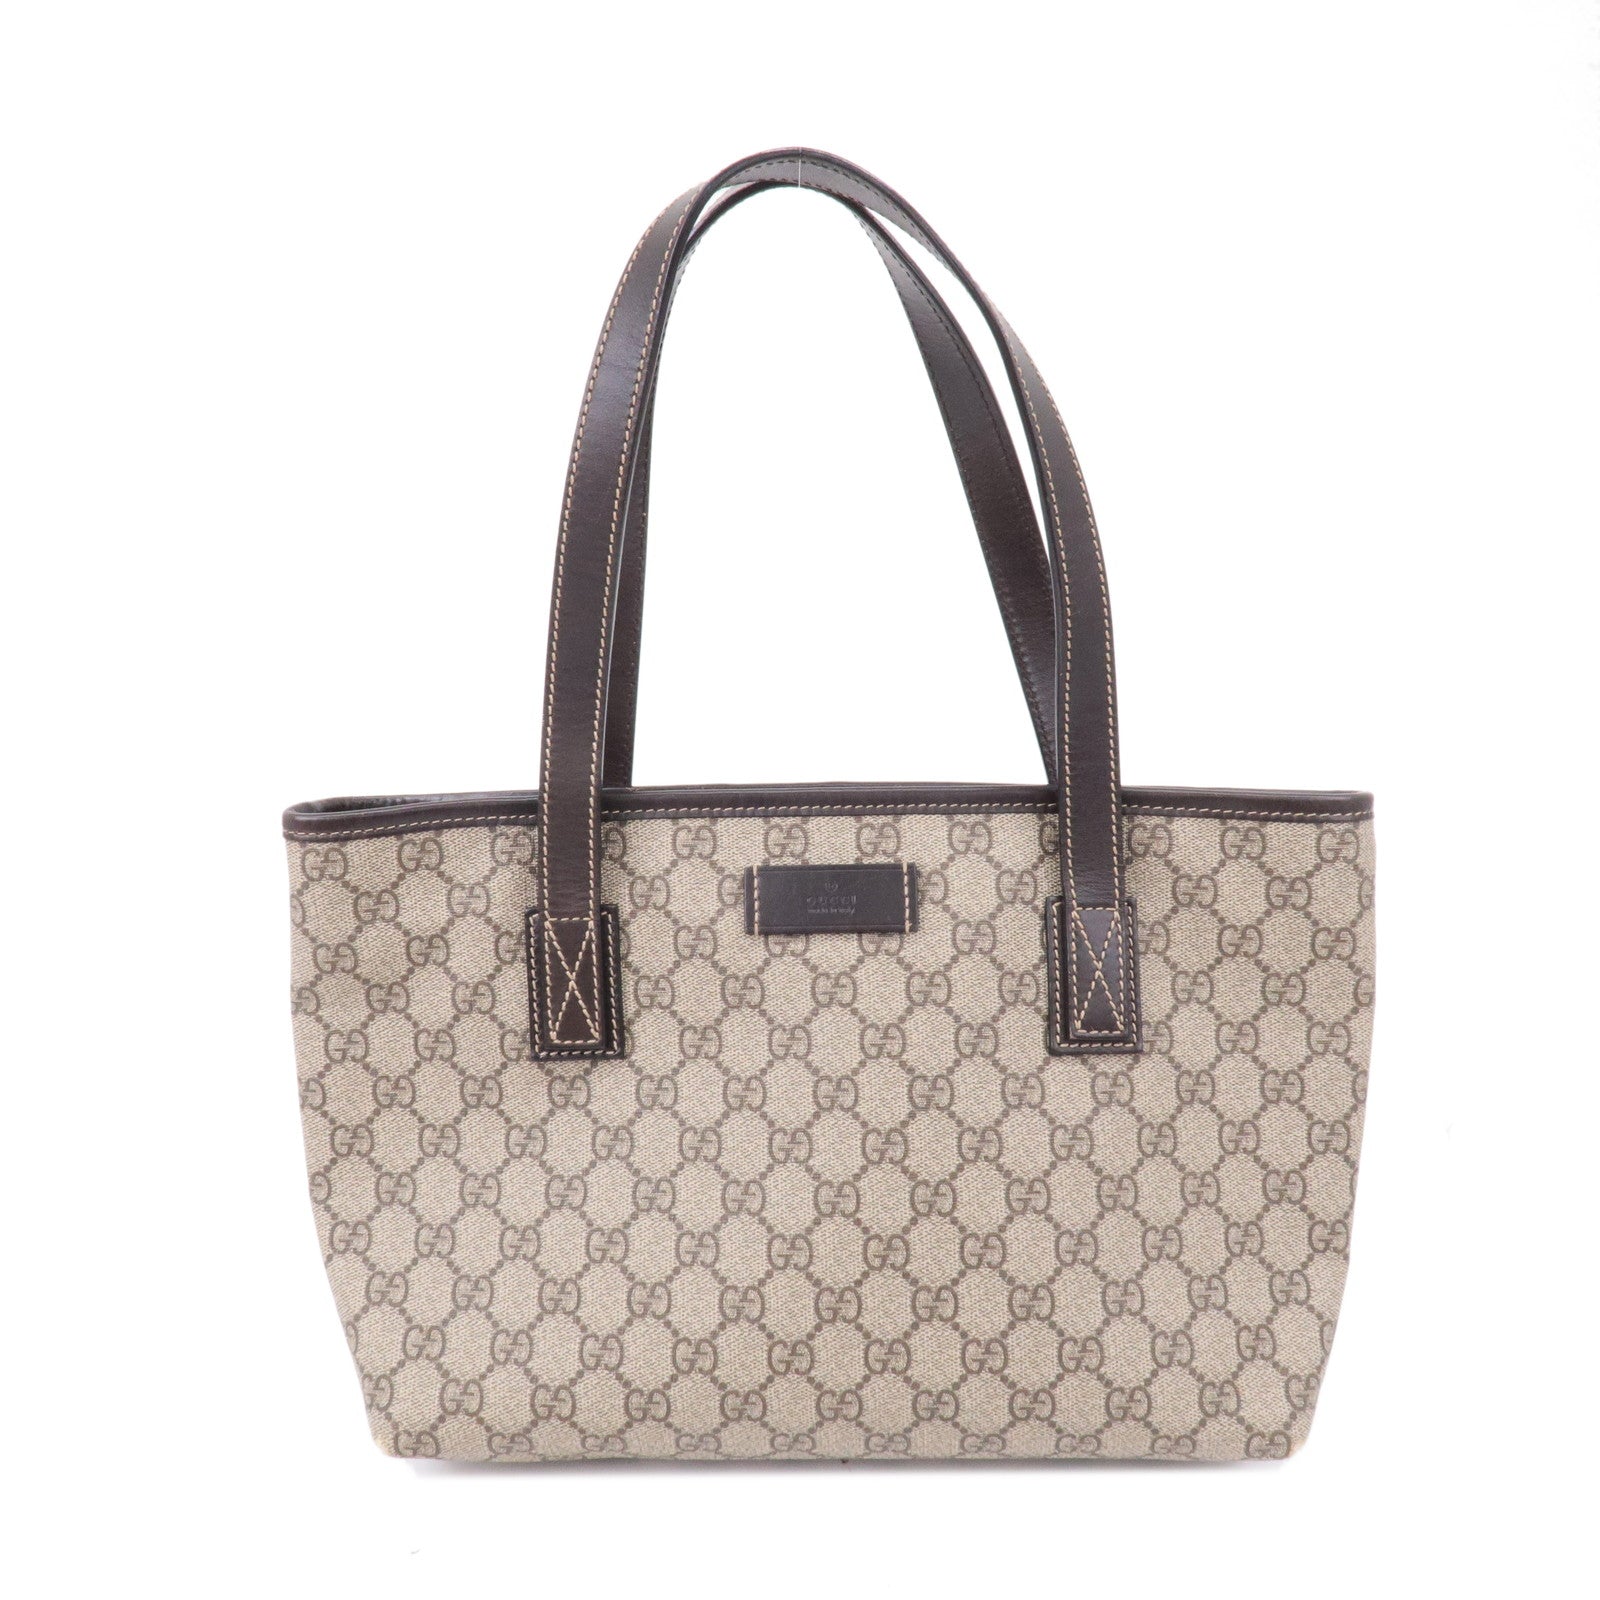 GUCCI-GG-Supreme-Leather-Tote-Bag-Beige-Brown-211138 – dct-ep_vintage luxury  Store